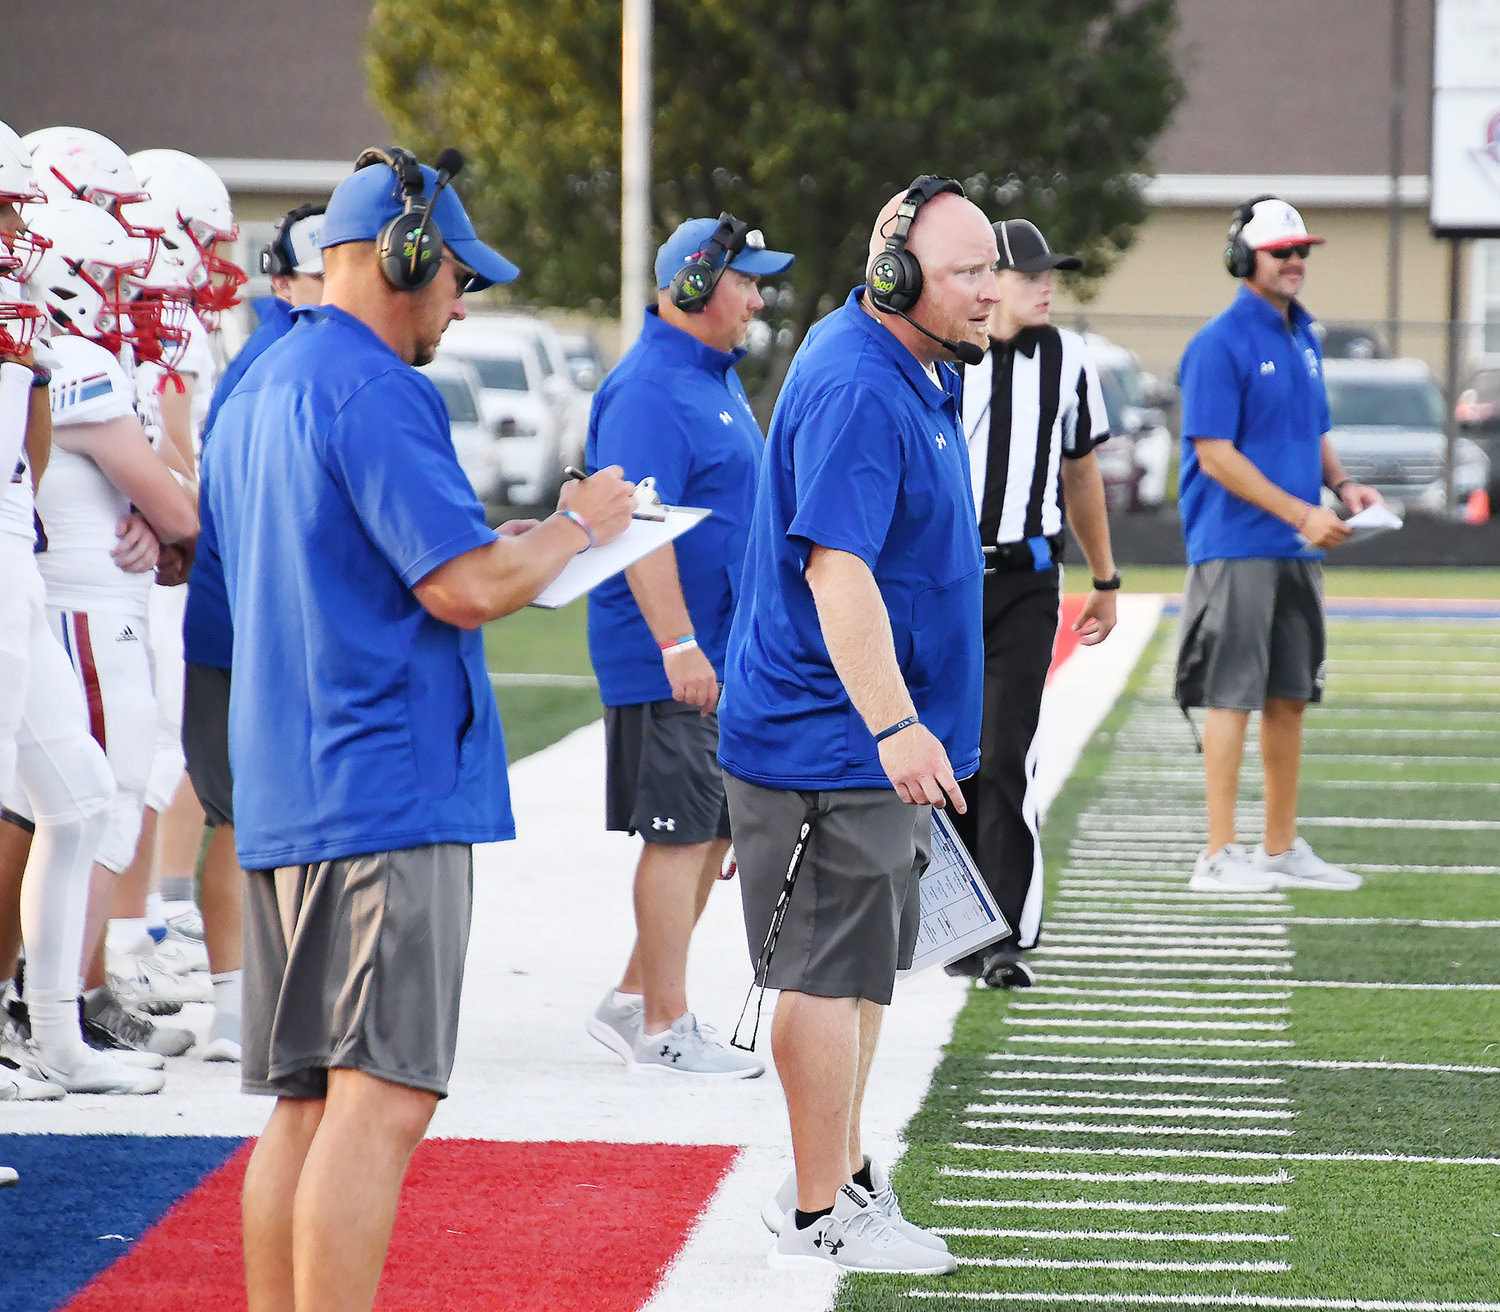 Moberly defensive coordinator Brett Boyer makes a call during the jamboree contest versus Boonville.